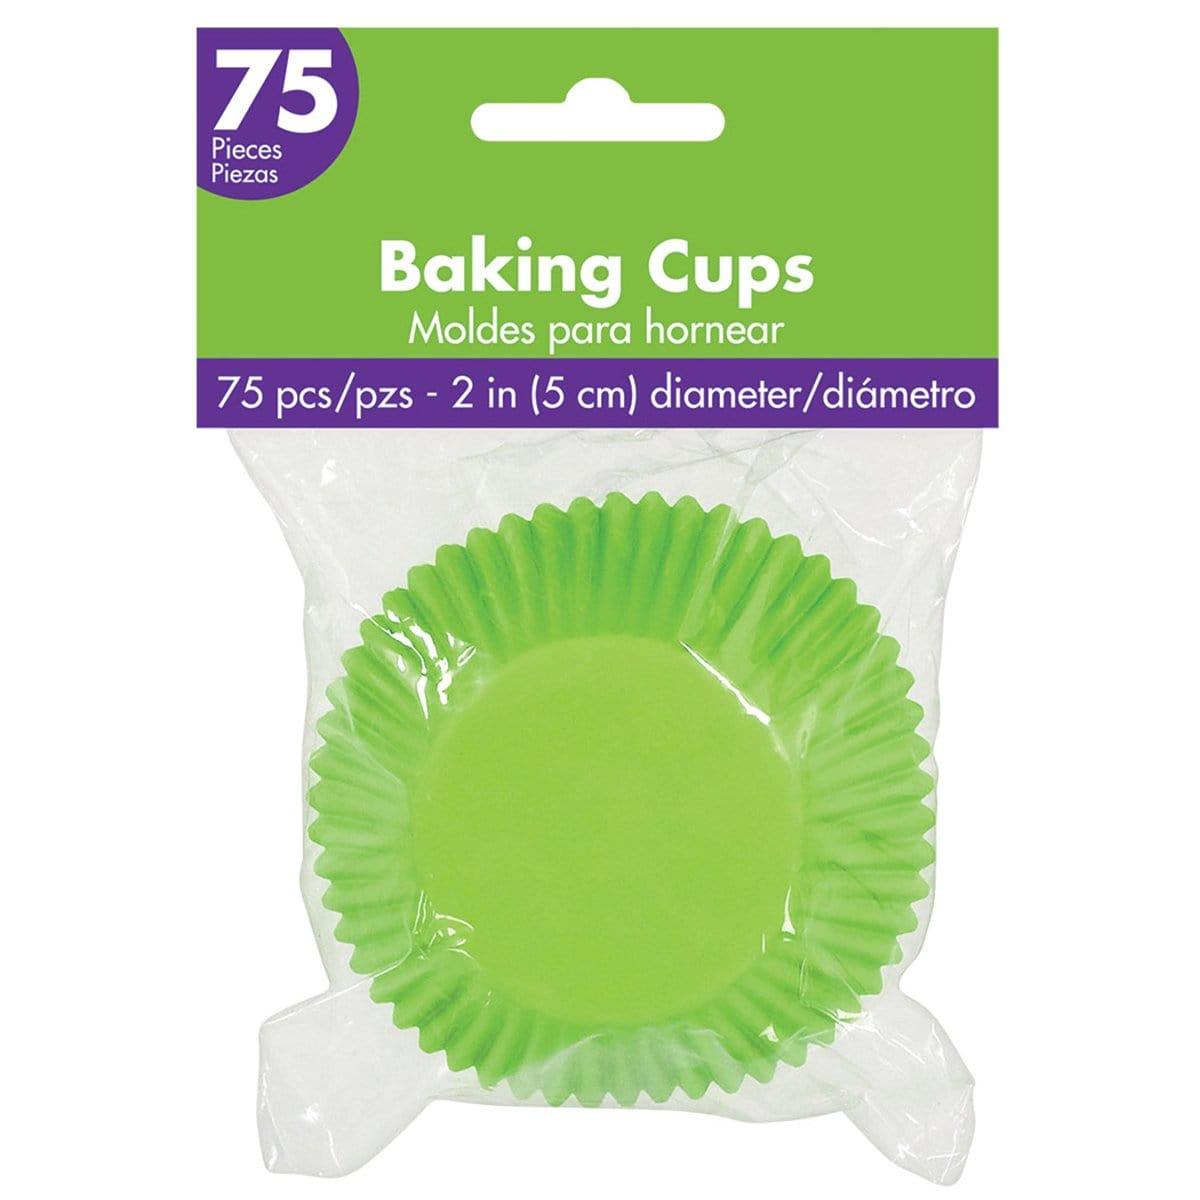 Buy Cake Supplies Cupcake Cases 75/pkg - Kiwi sold at Party Expert